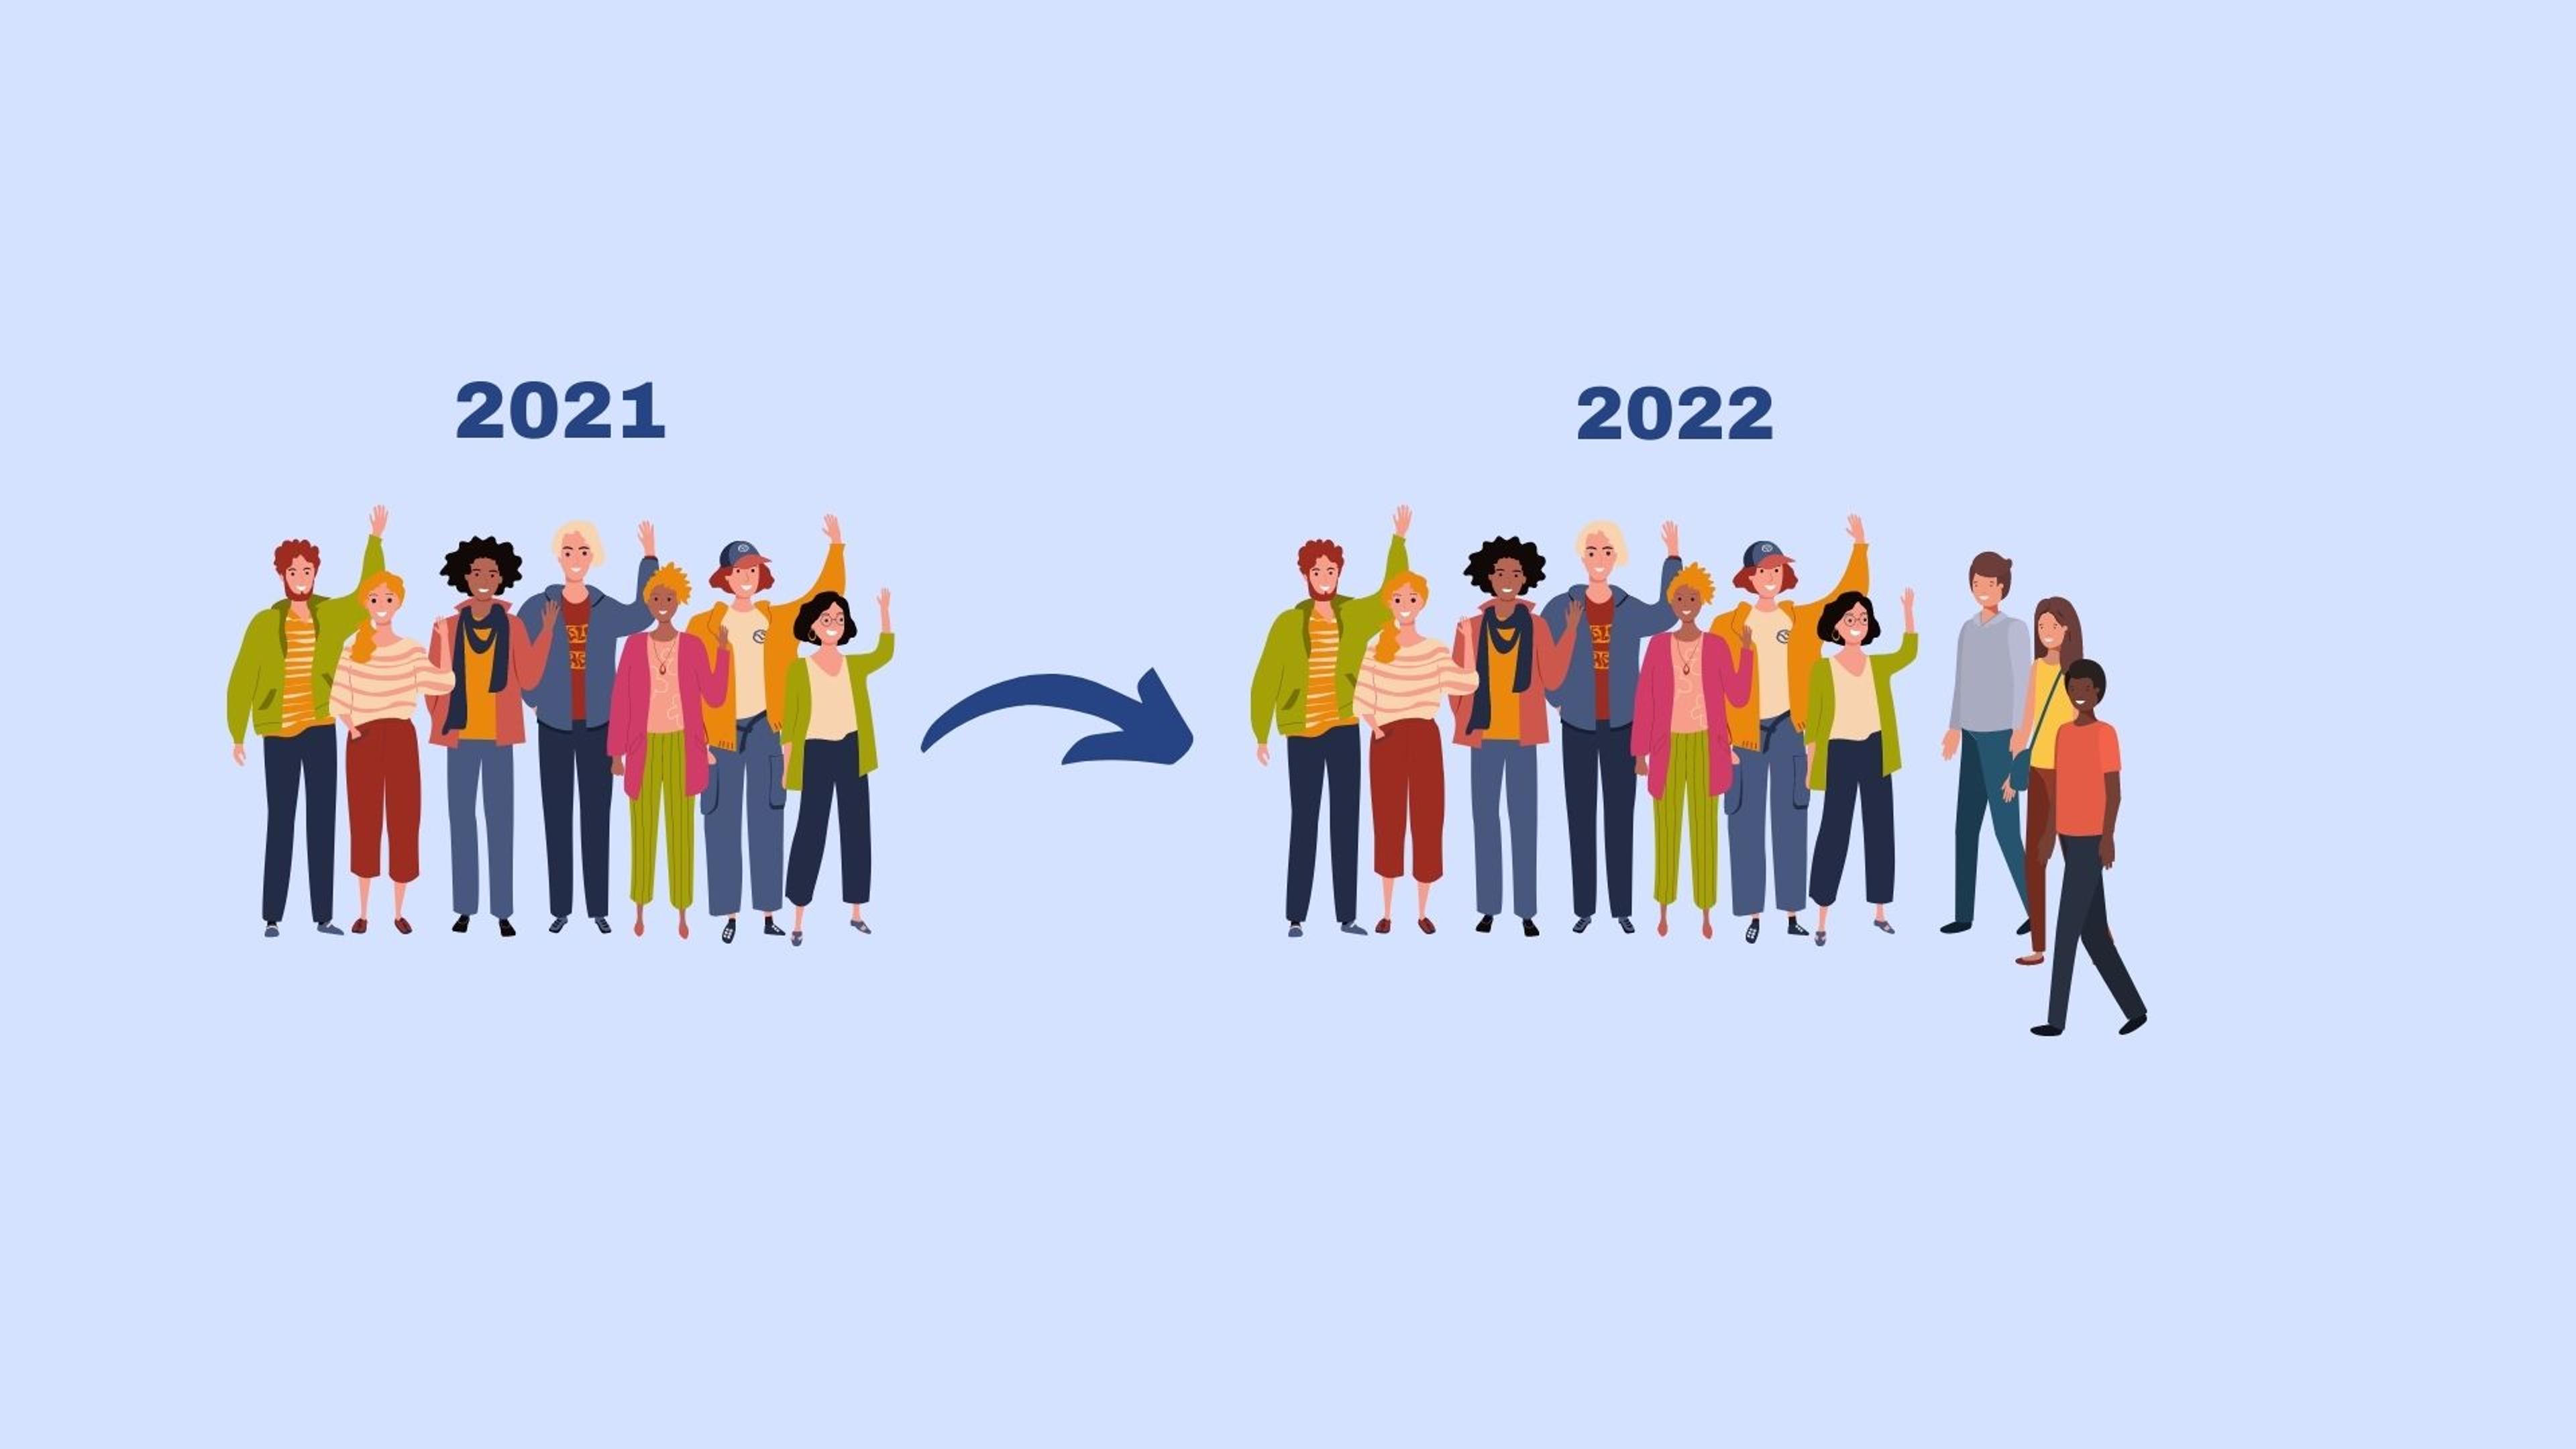 Group of young people in 2021, same group of young people in 2022, but with three new people walking into the group